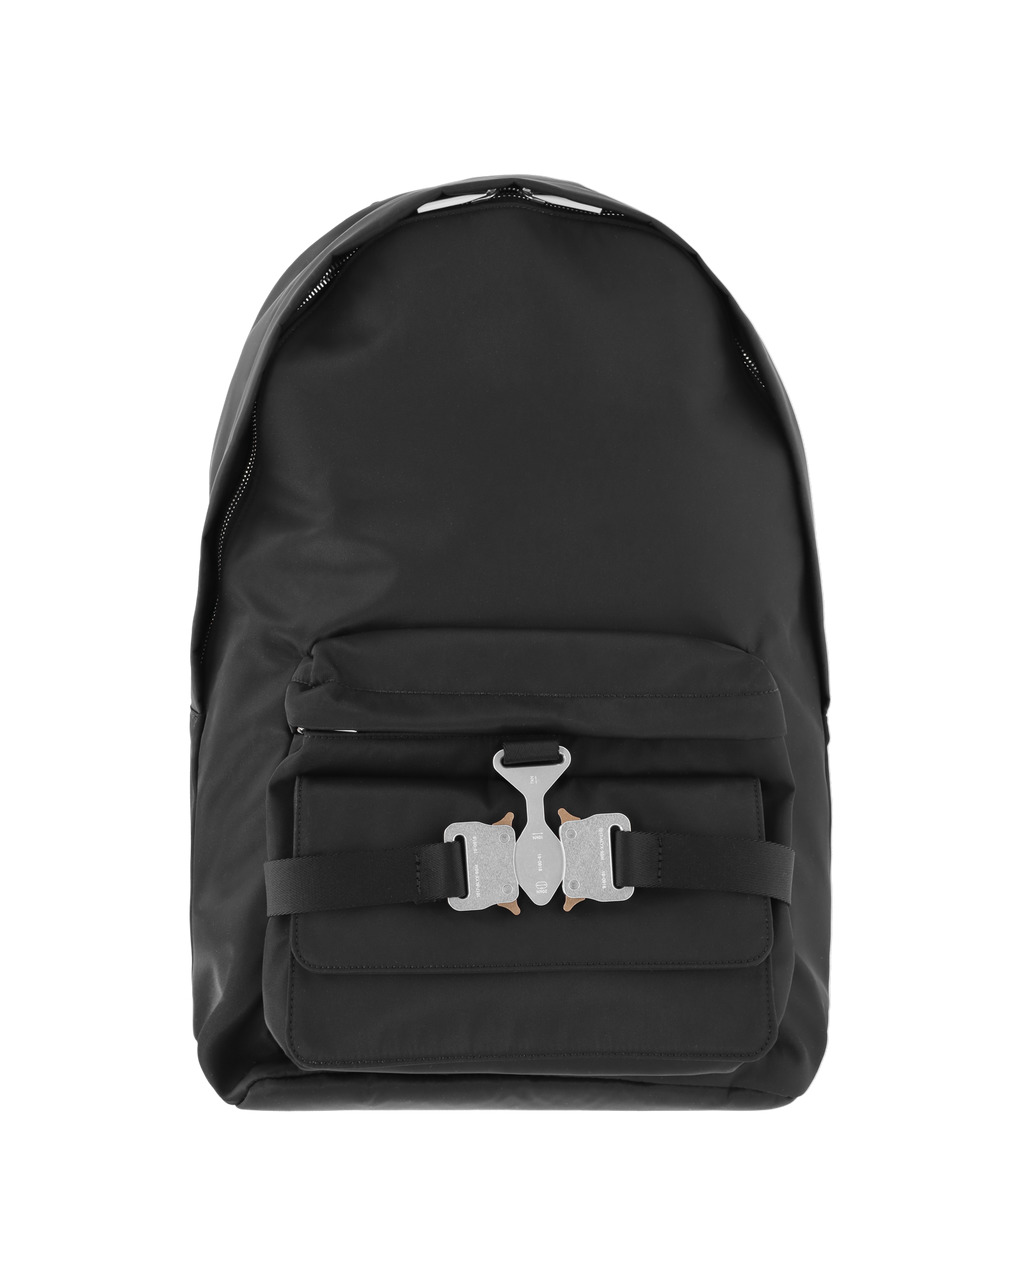 TRICON BACKPACK - 1